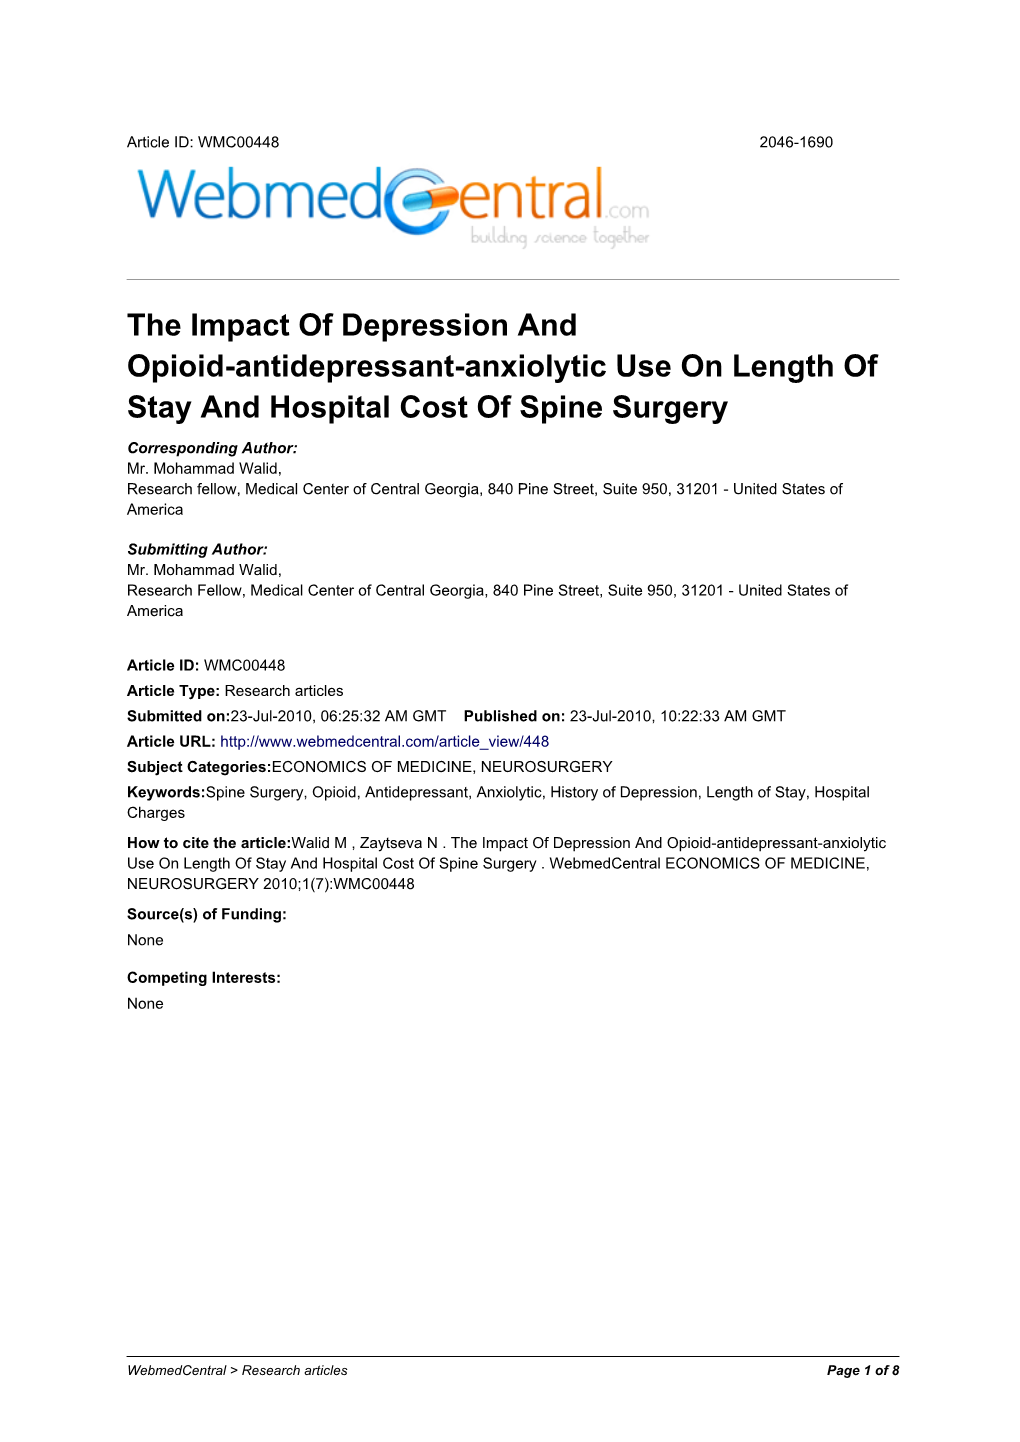 The Impact of Depression and Opioid-Antidepressant-Anxiolytic Use on Length of Stay and Hospital Cost of Spine Surgery